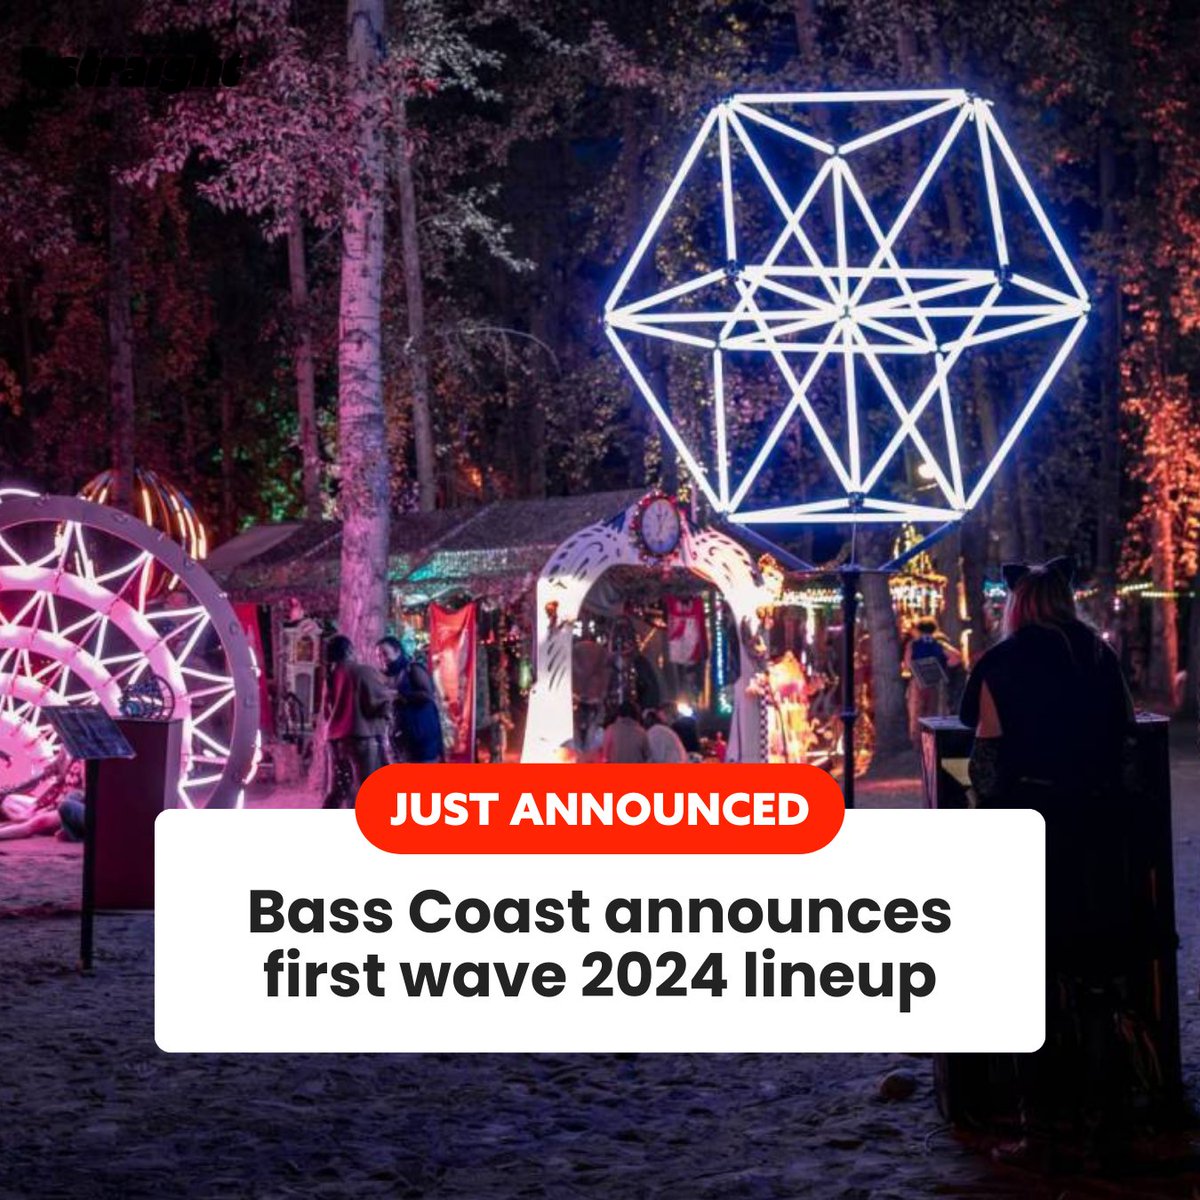 BC’s best electronic music and arts festival is BACK 🎶 : straight.com/just-announced…